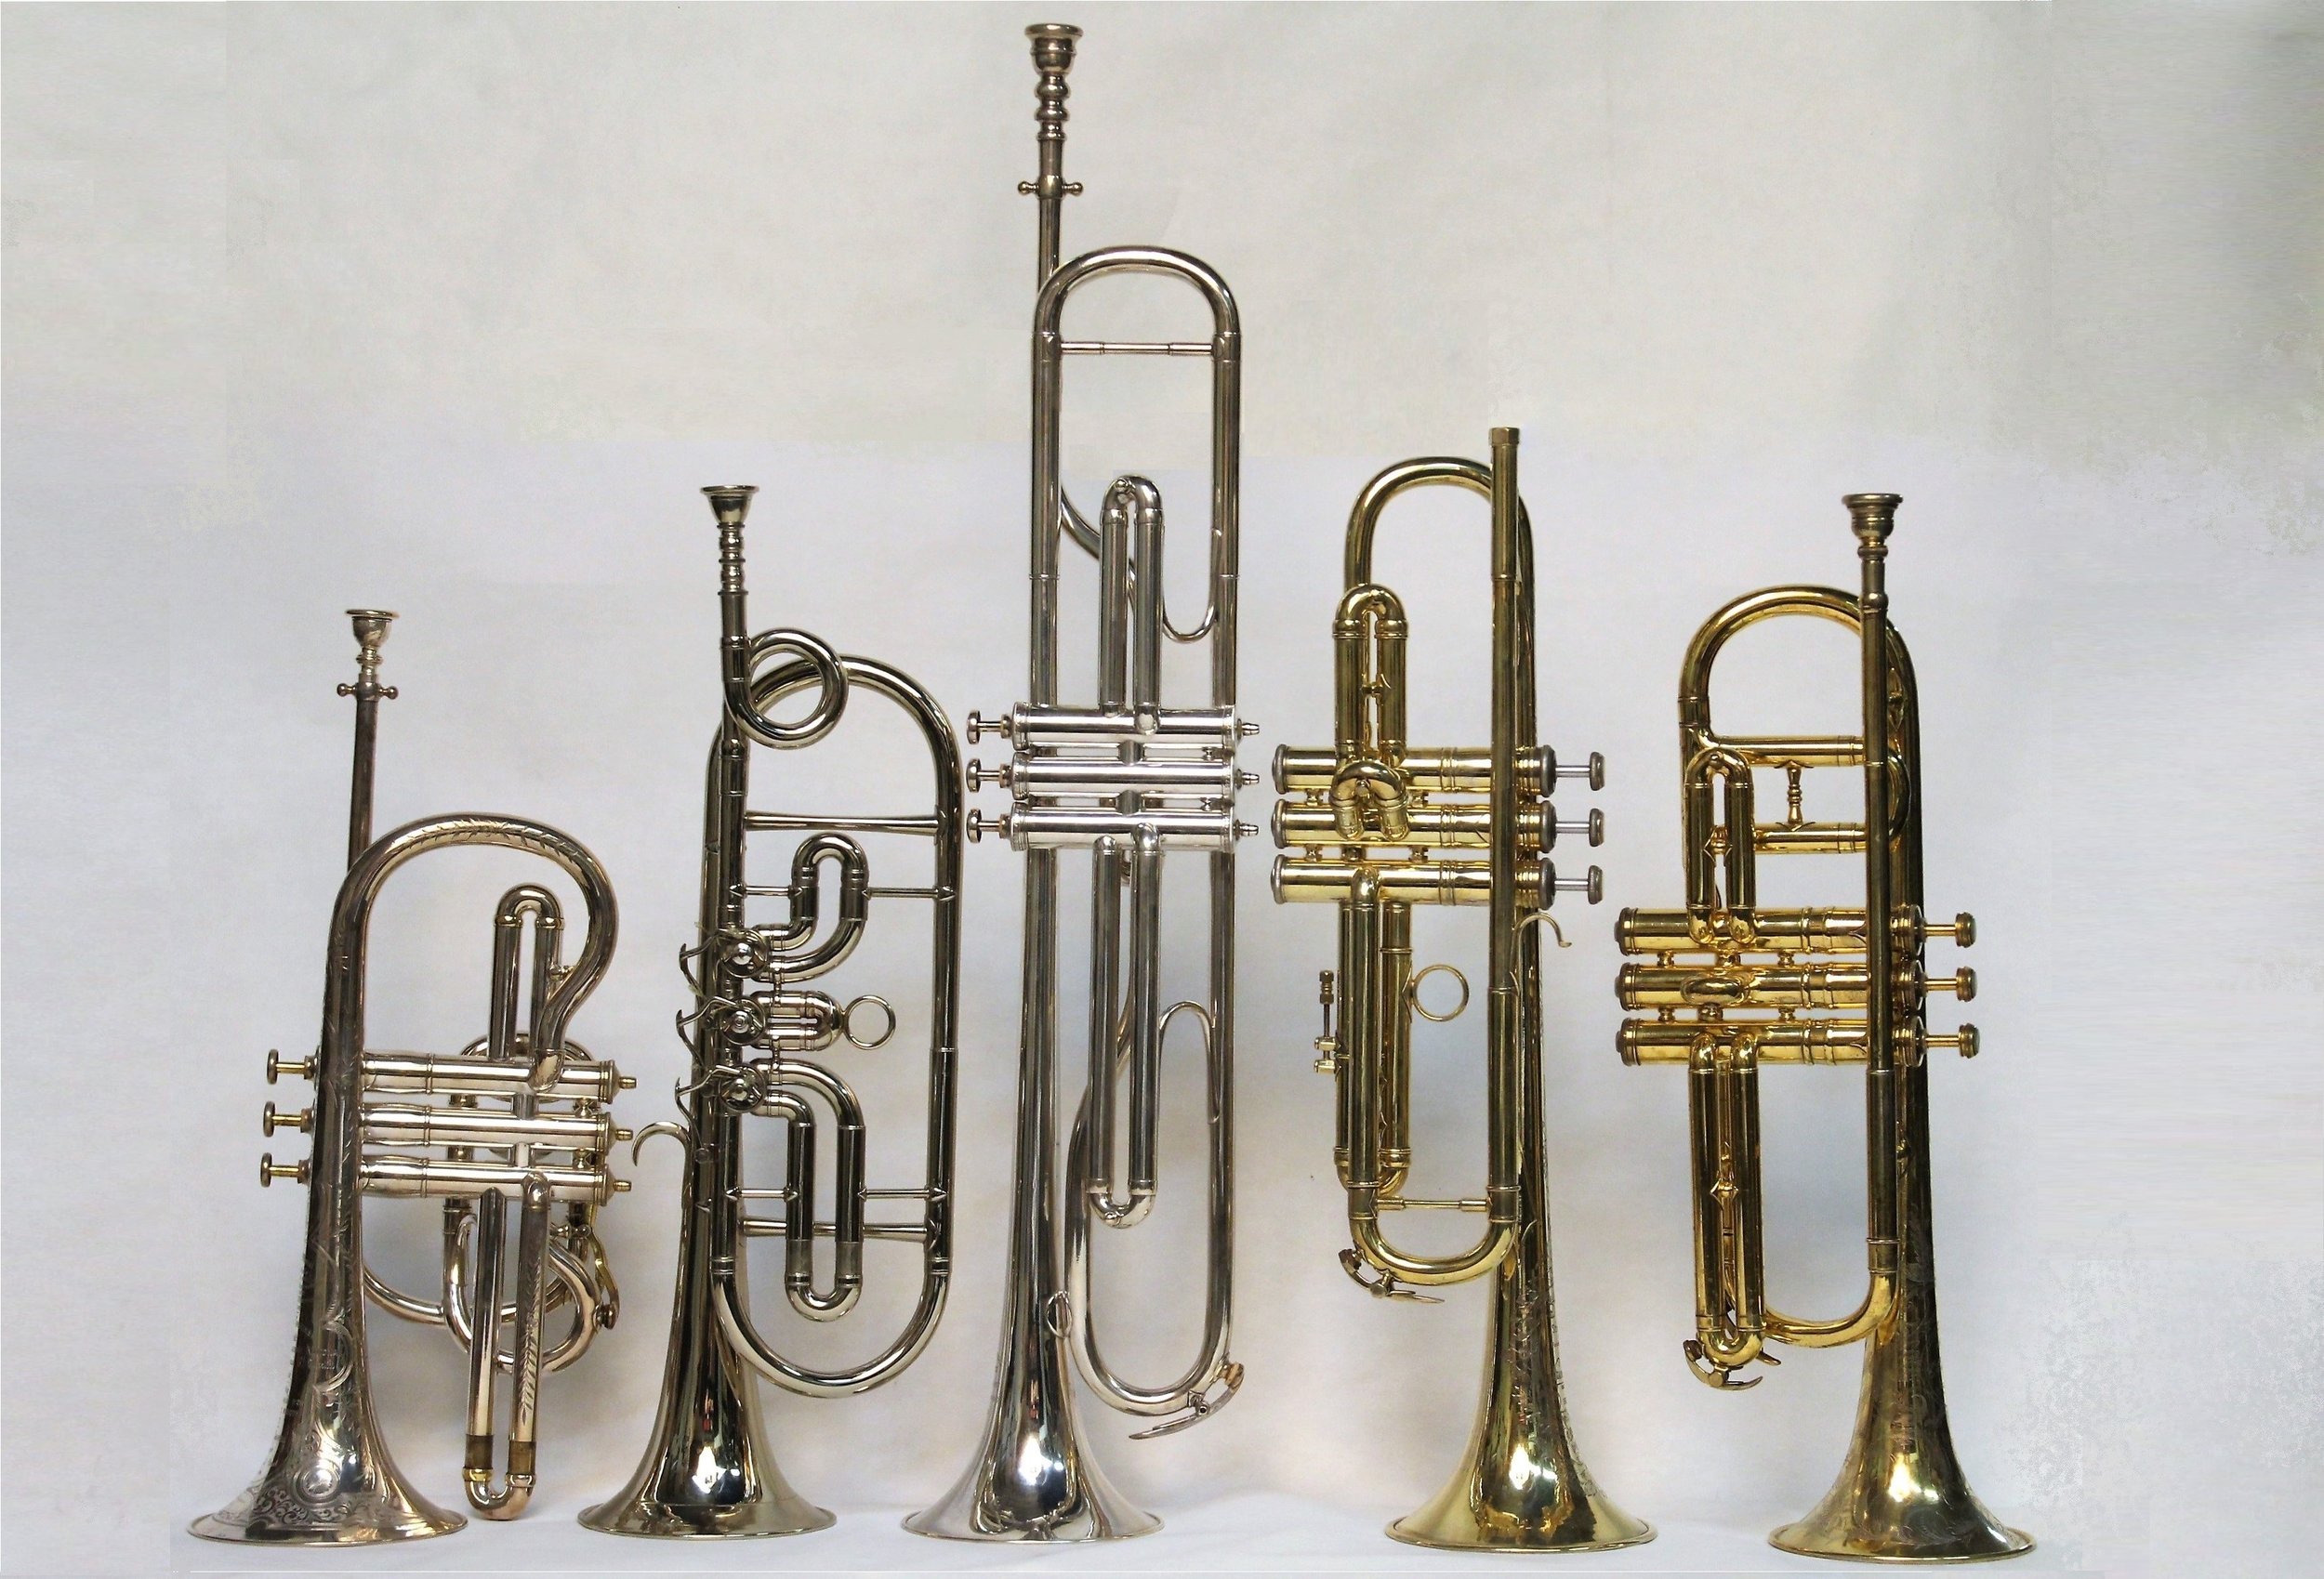 Difference Between Trumpets and Cornets